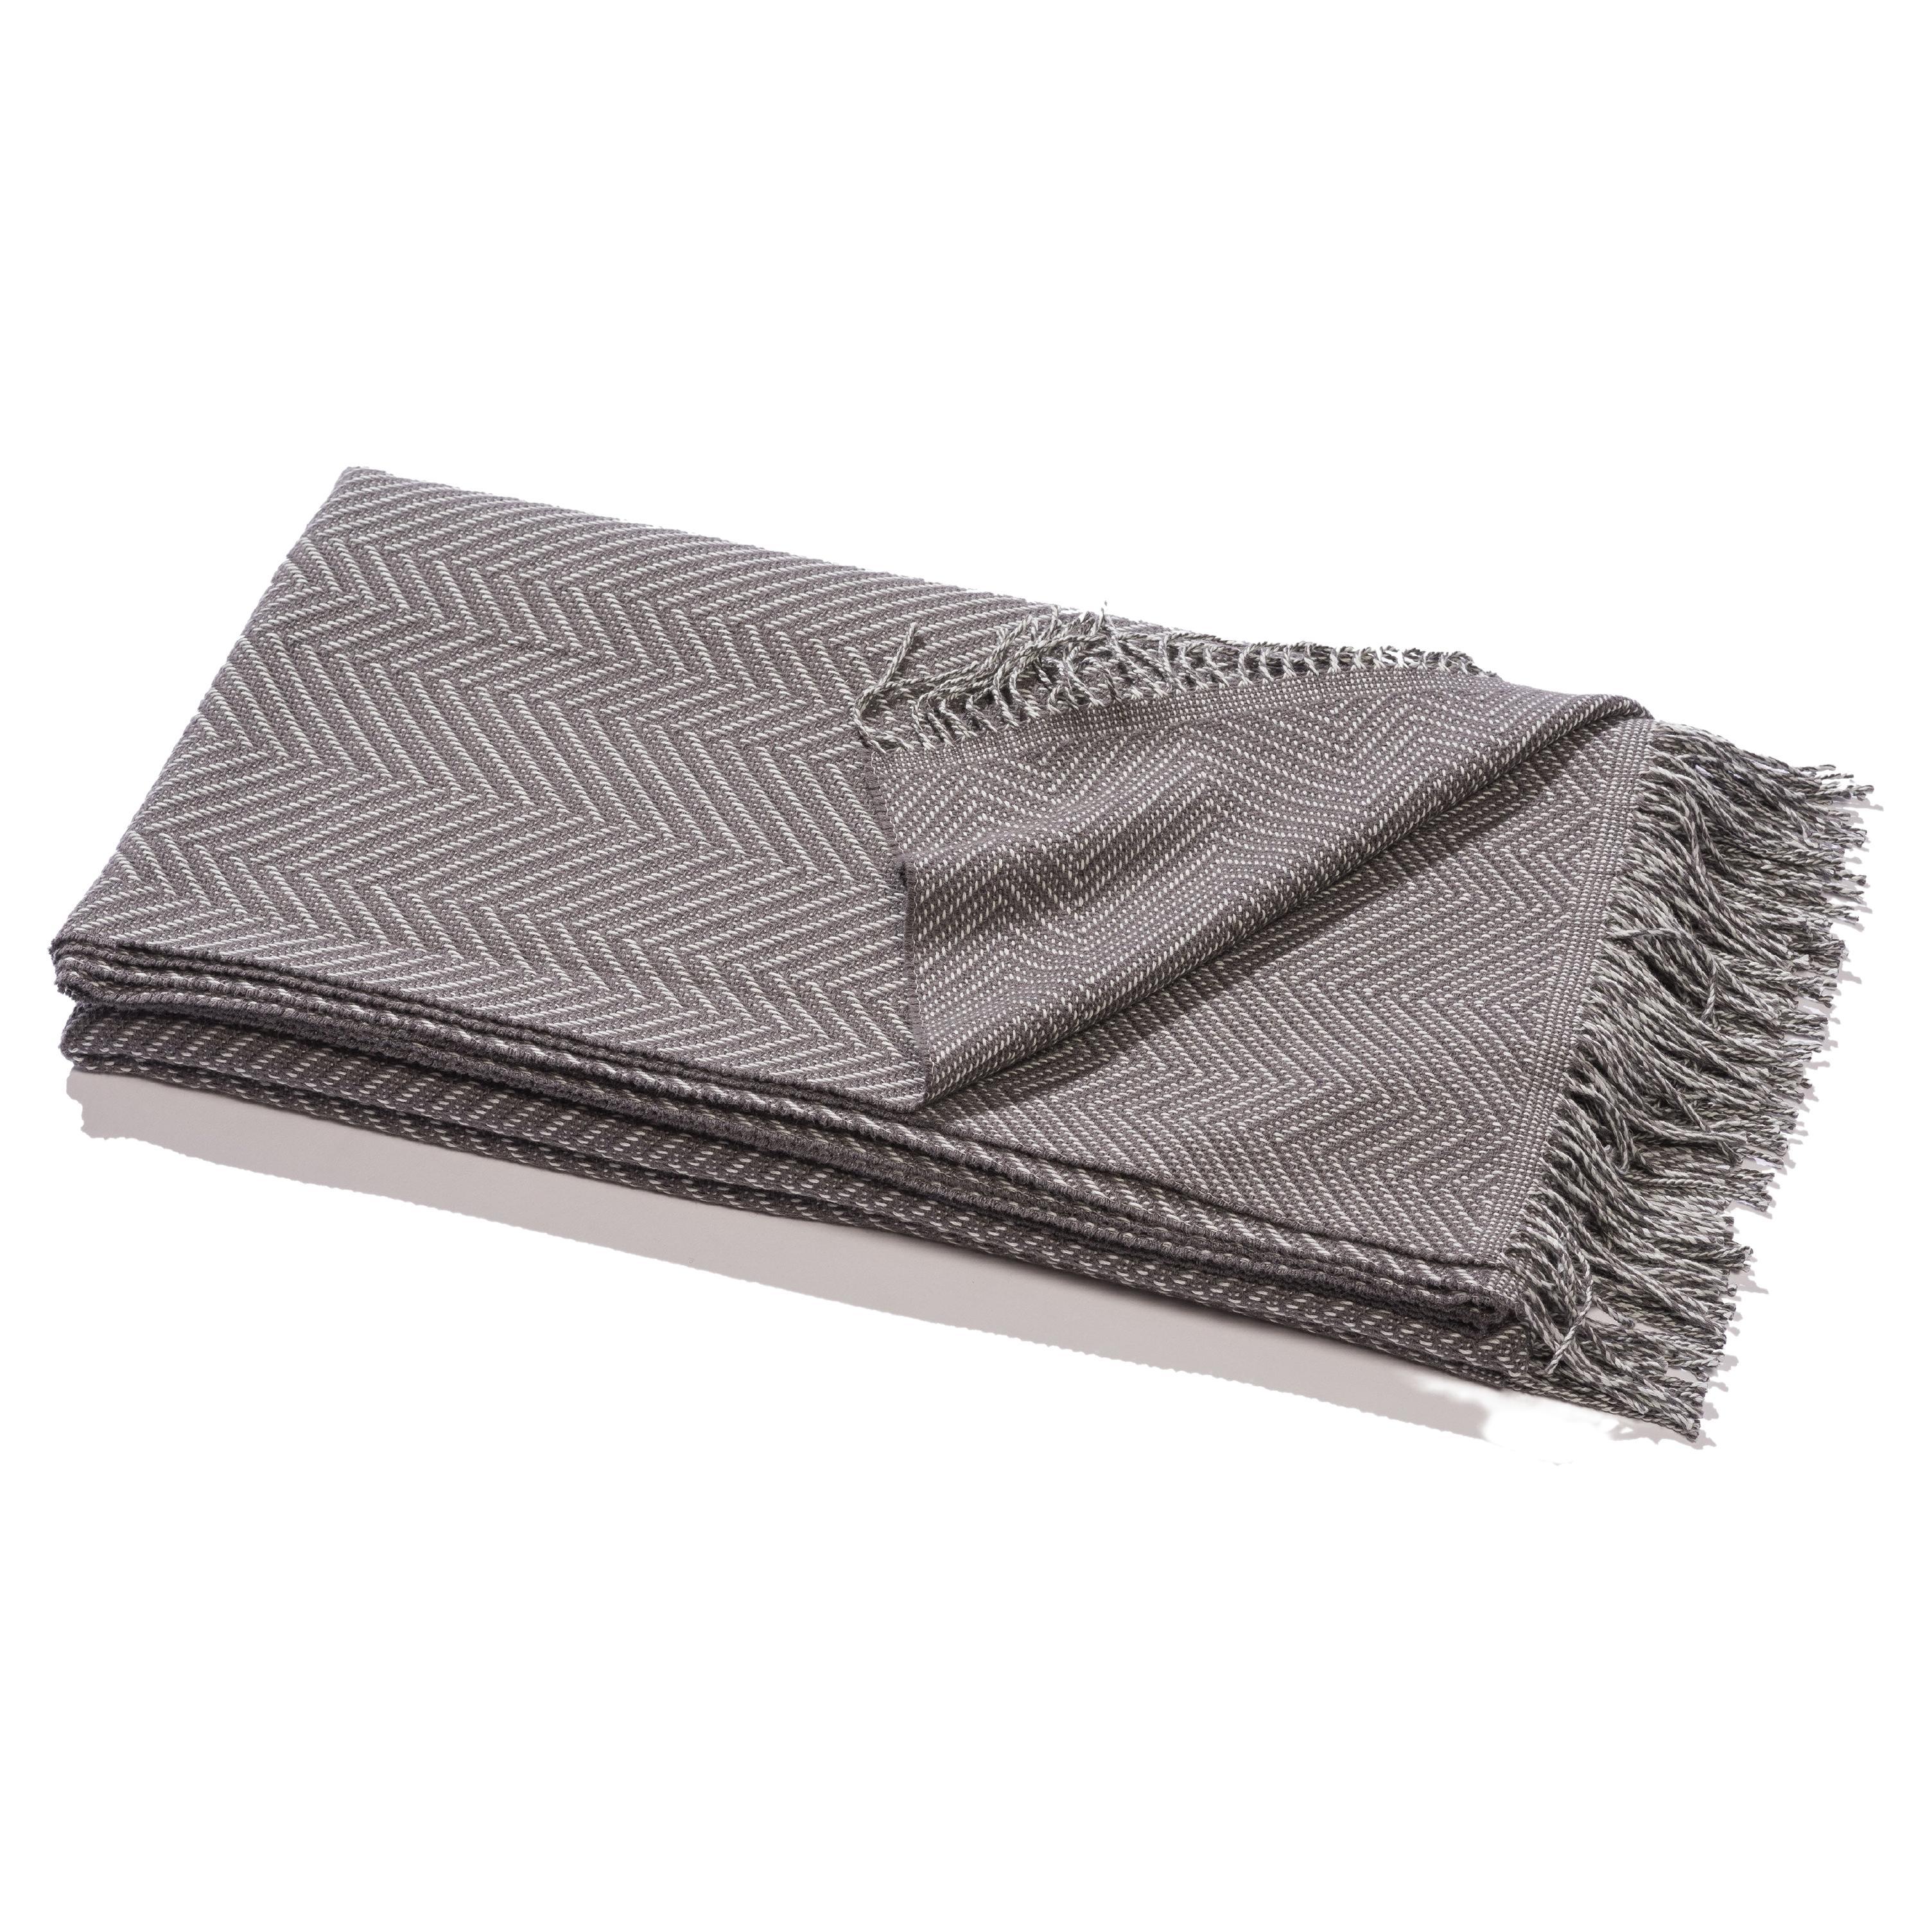 Bed Throw Herringbone Woven of Extra Fine Merino in Grey by Catharina Mende For Sale